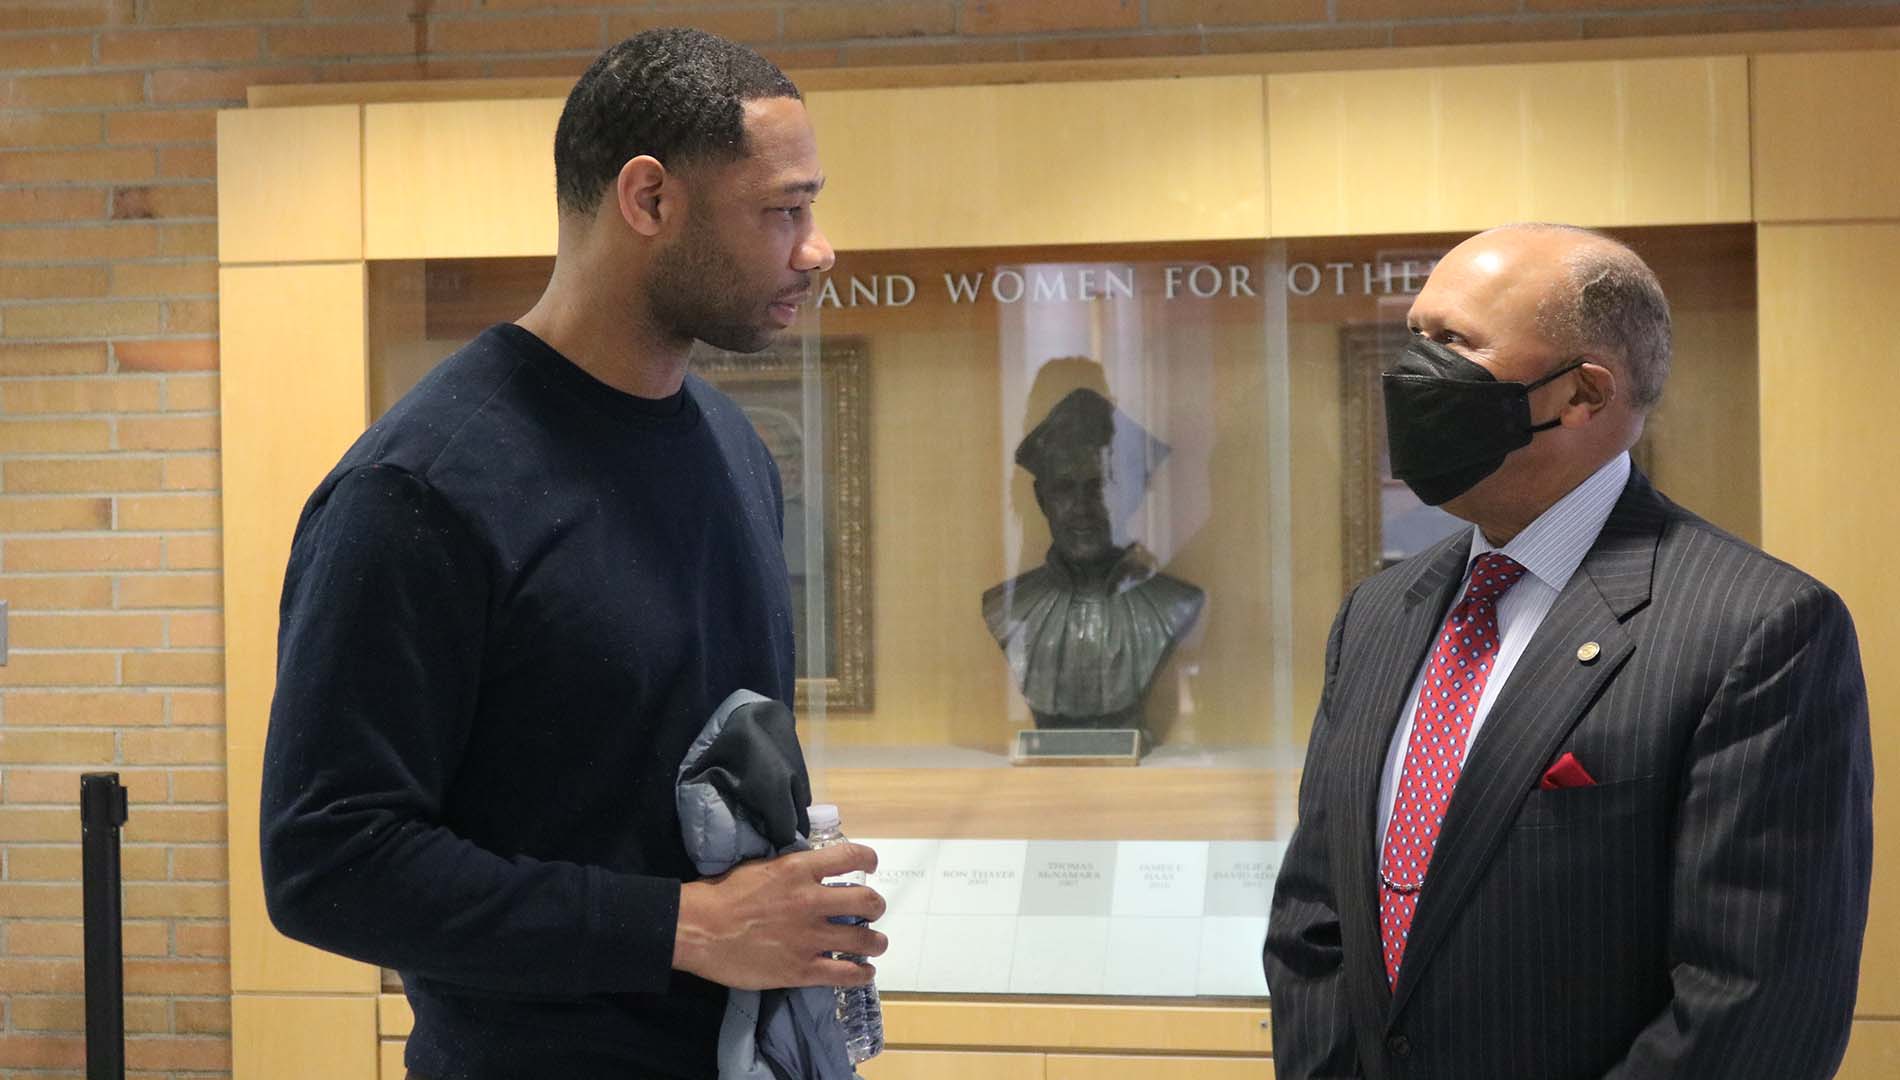 Willie Green '03 talks to Detroit Mercy President Antoine M. Garibaldi at Calihan Hall before the Pelicans played the Pistons.